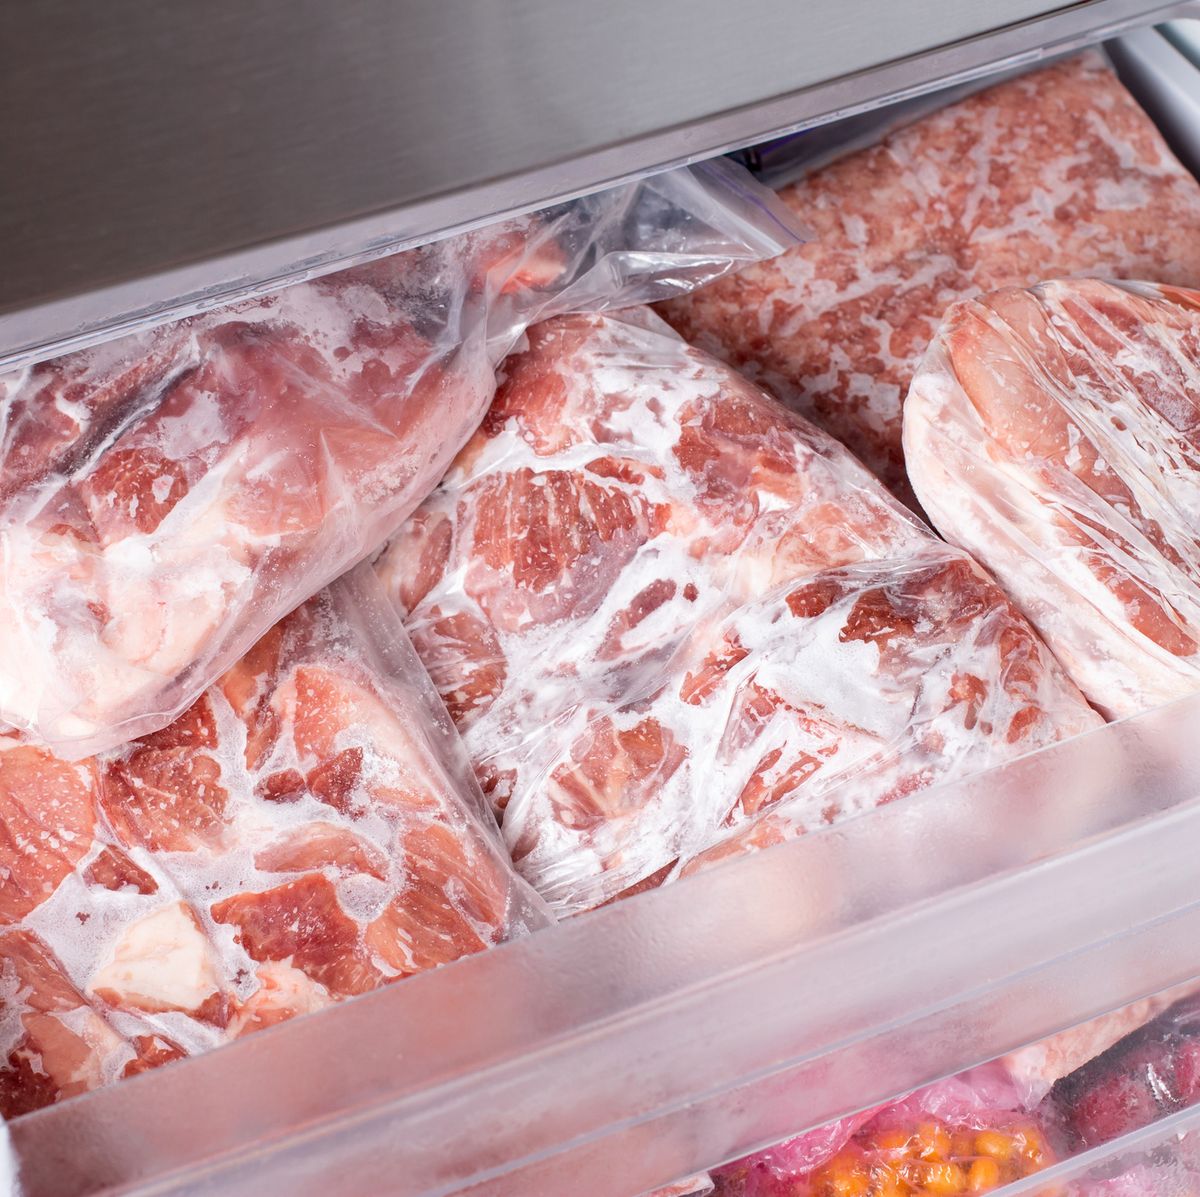 How to wrap meat to freeze